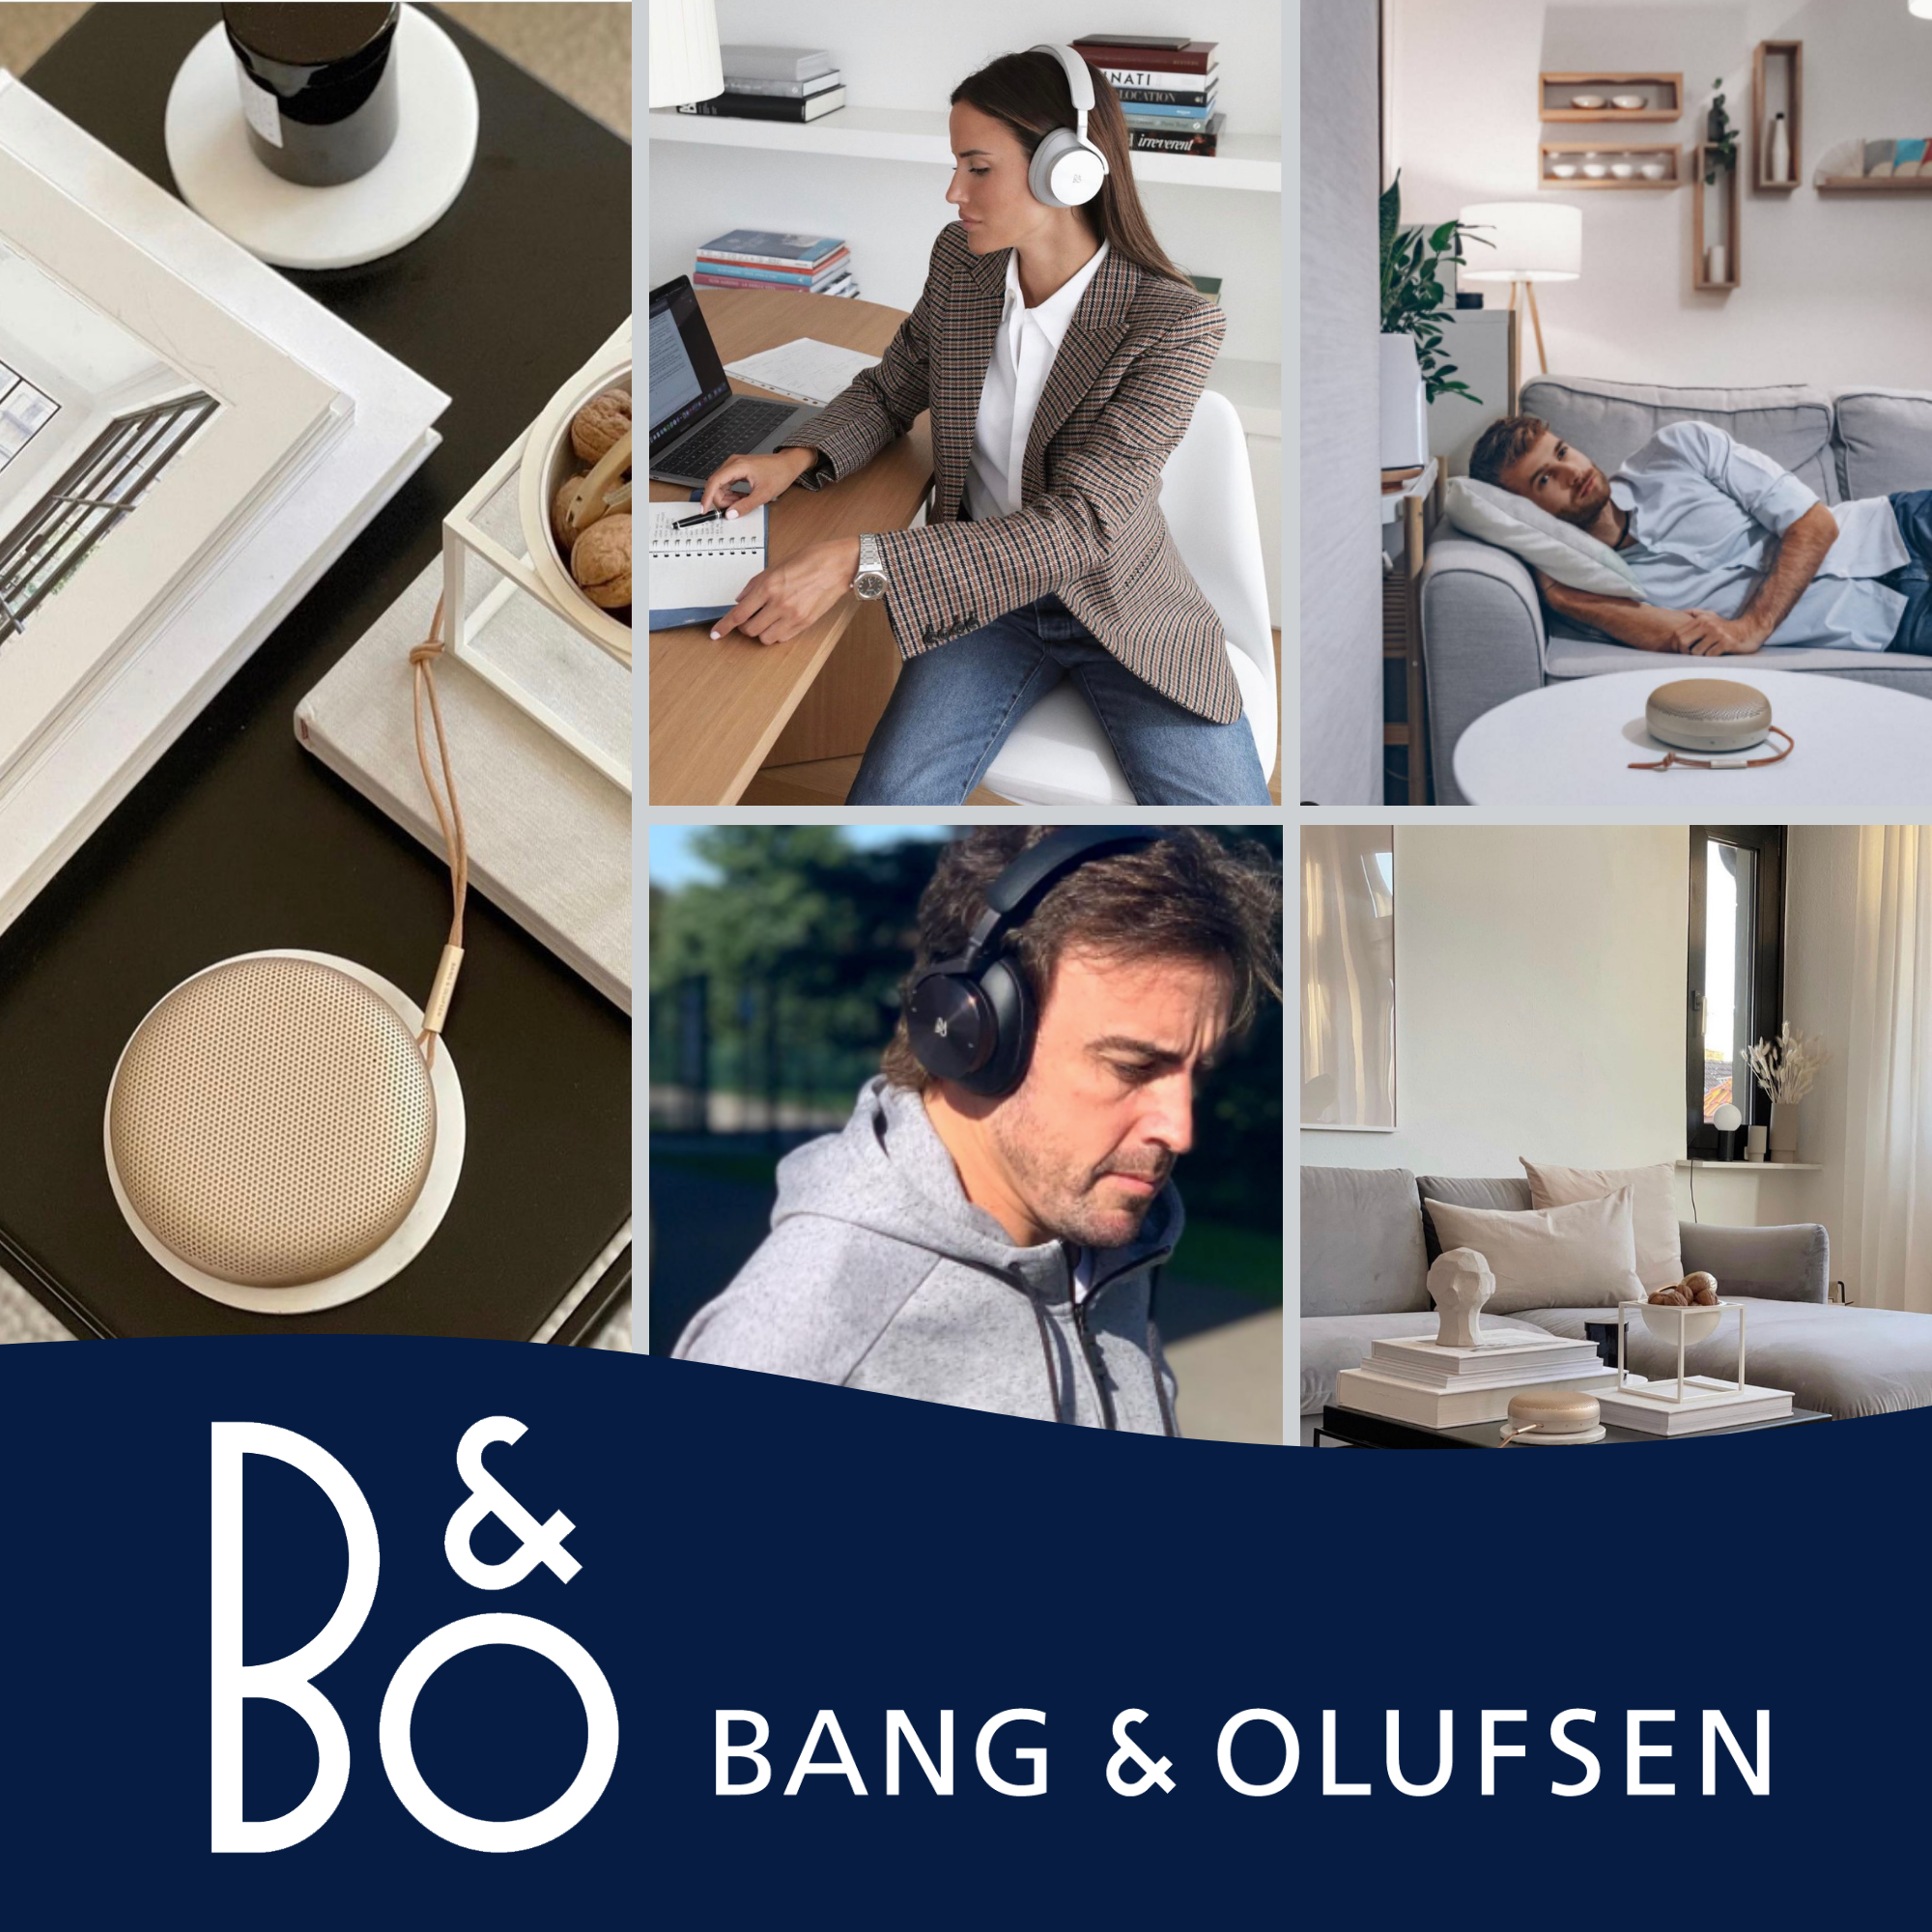 How Visibility into Data Empowered Bang & Olufsen to Quickly Optimize Influencer Marketing Performance